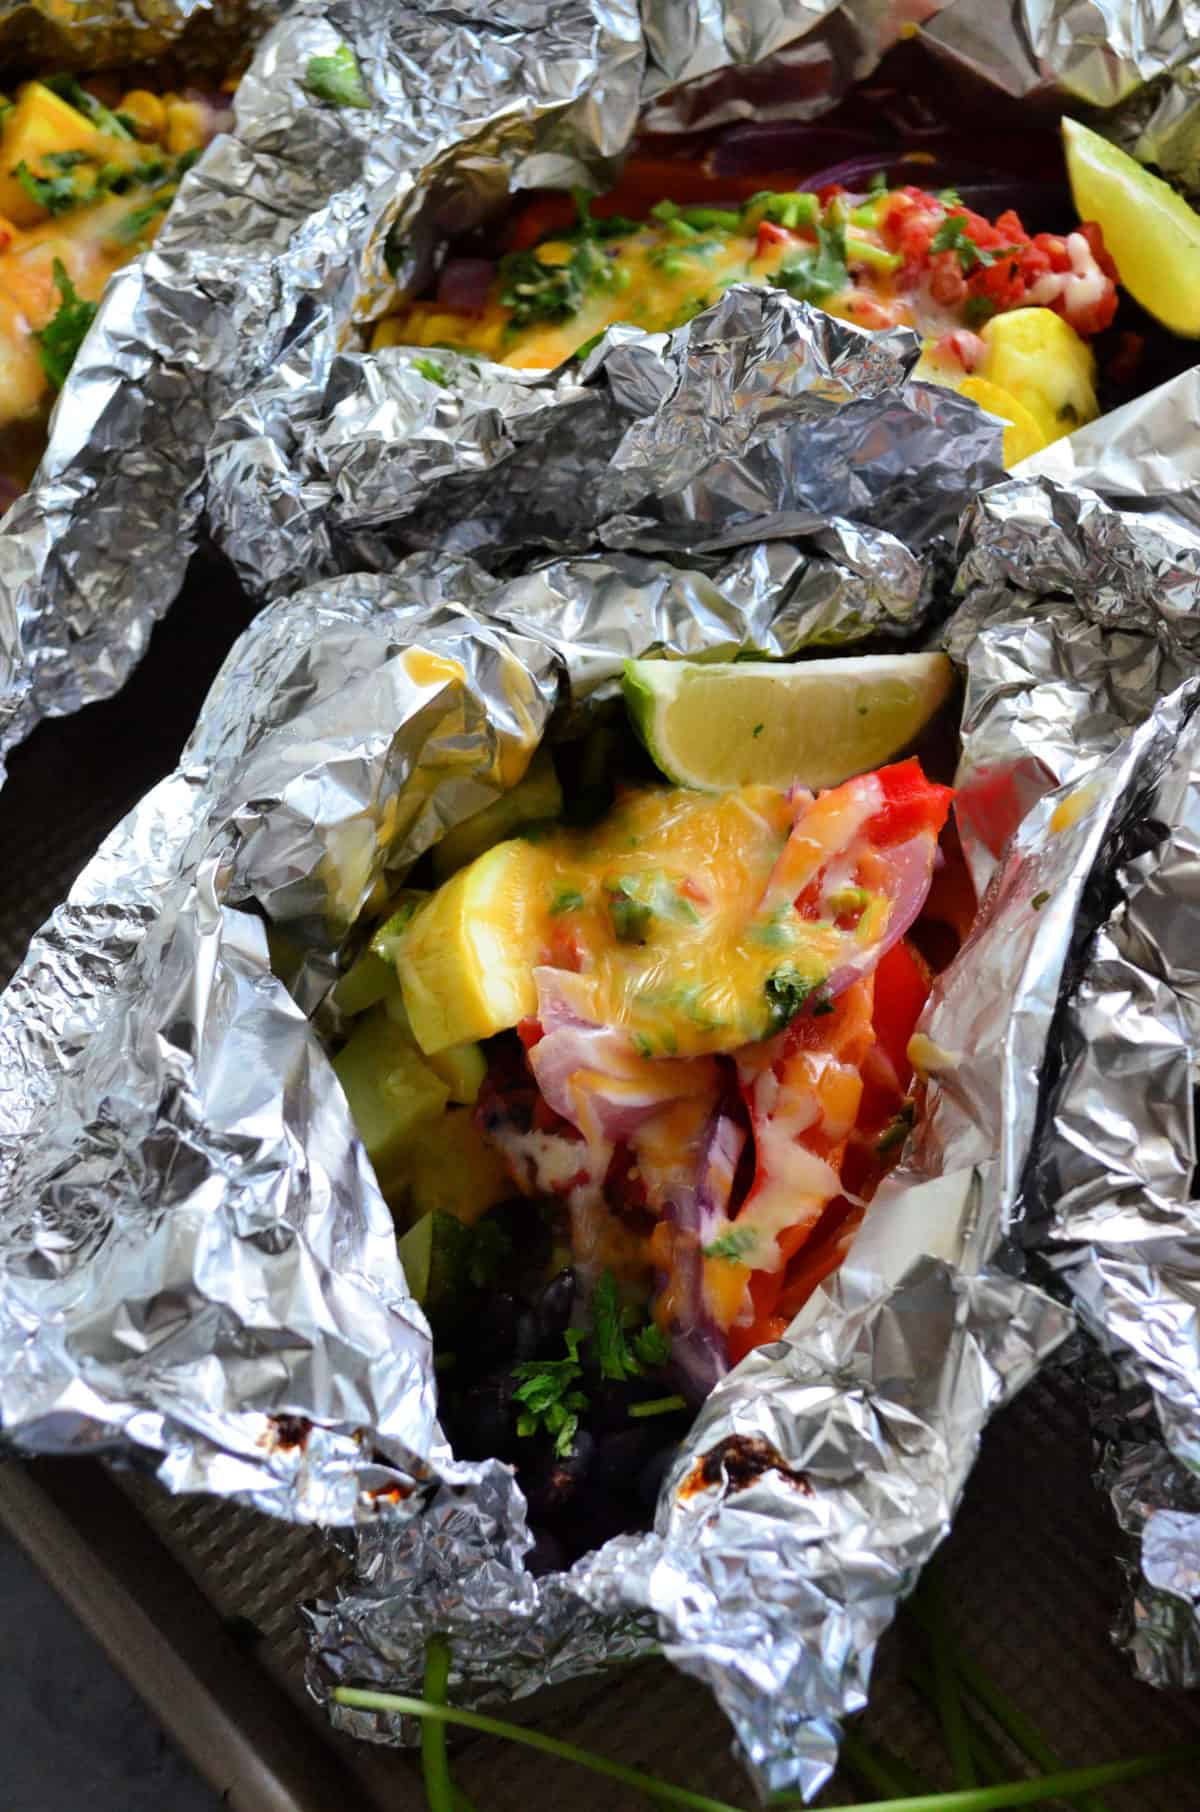 2 foil packets of melted cheese over veggies up close.